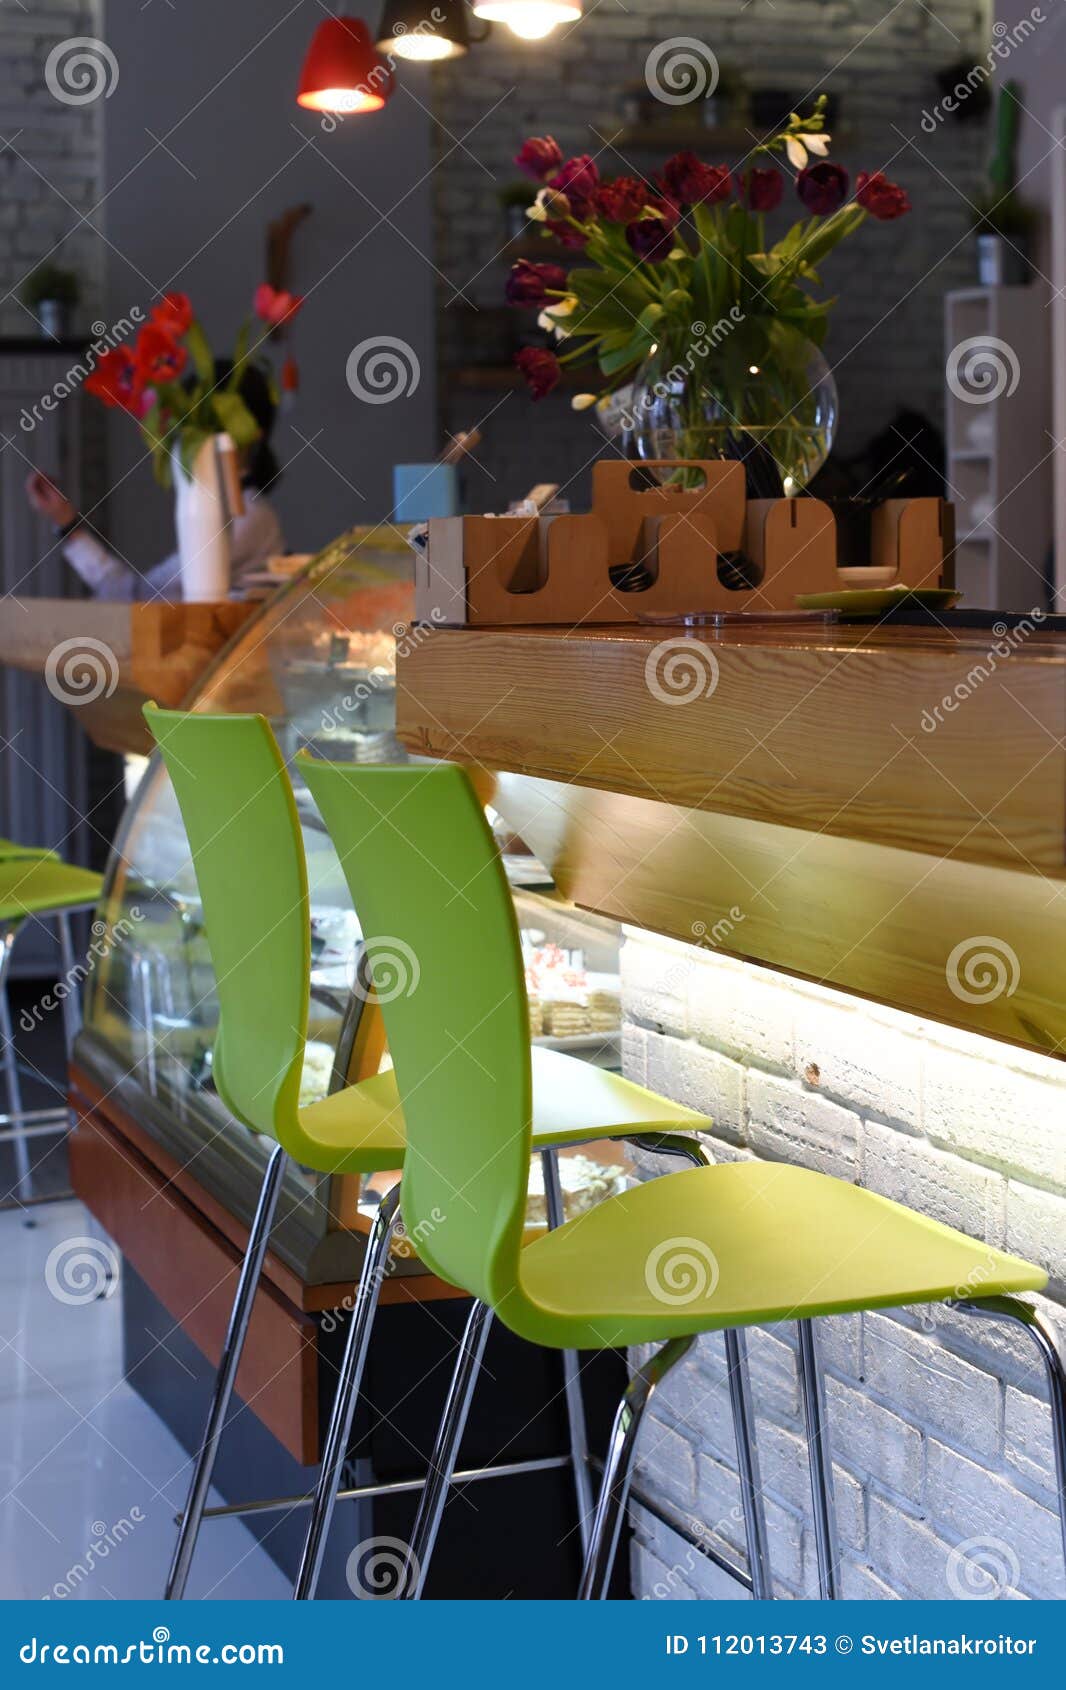 a photo of an interior of a cozy modern urban cafe with low warm light and noone inside